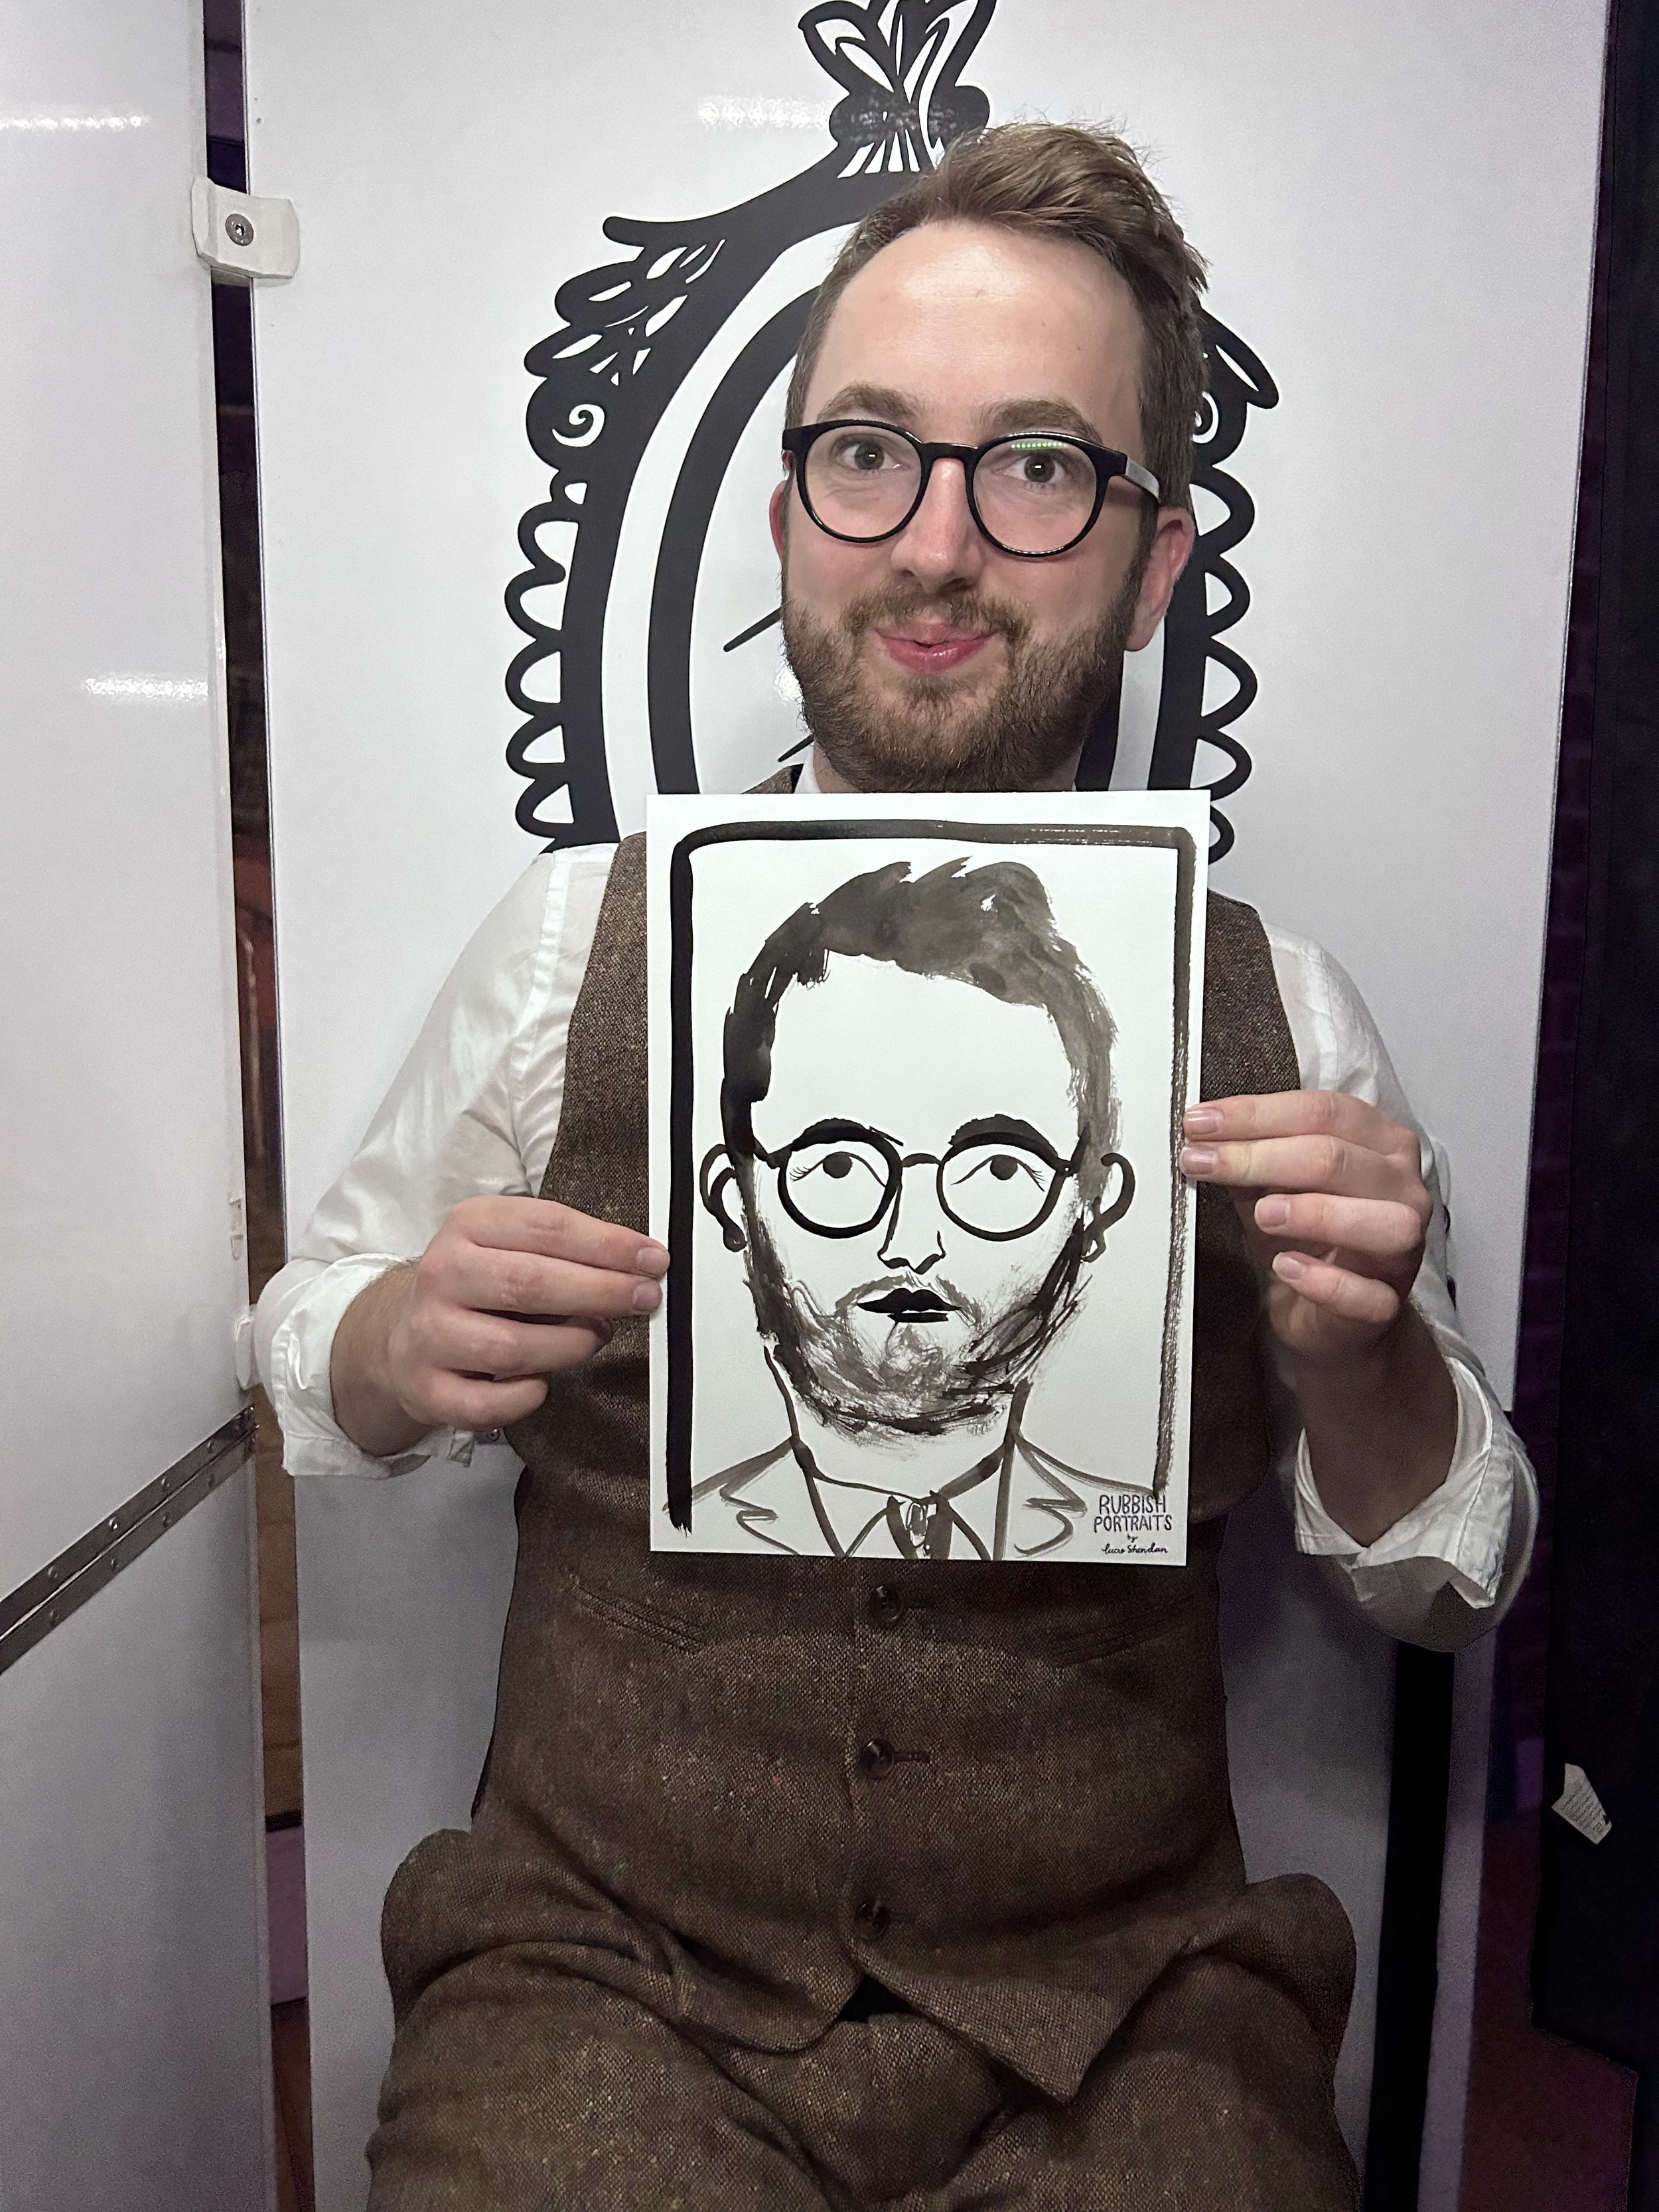 Man in Live Portrait booth  - lucie sheridan.jpg